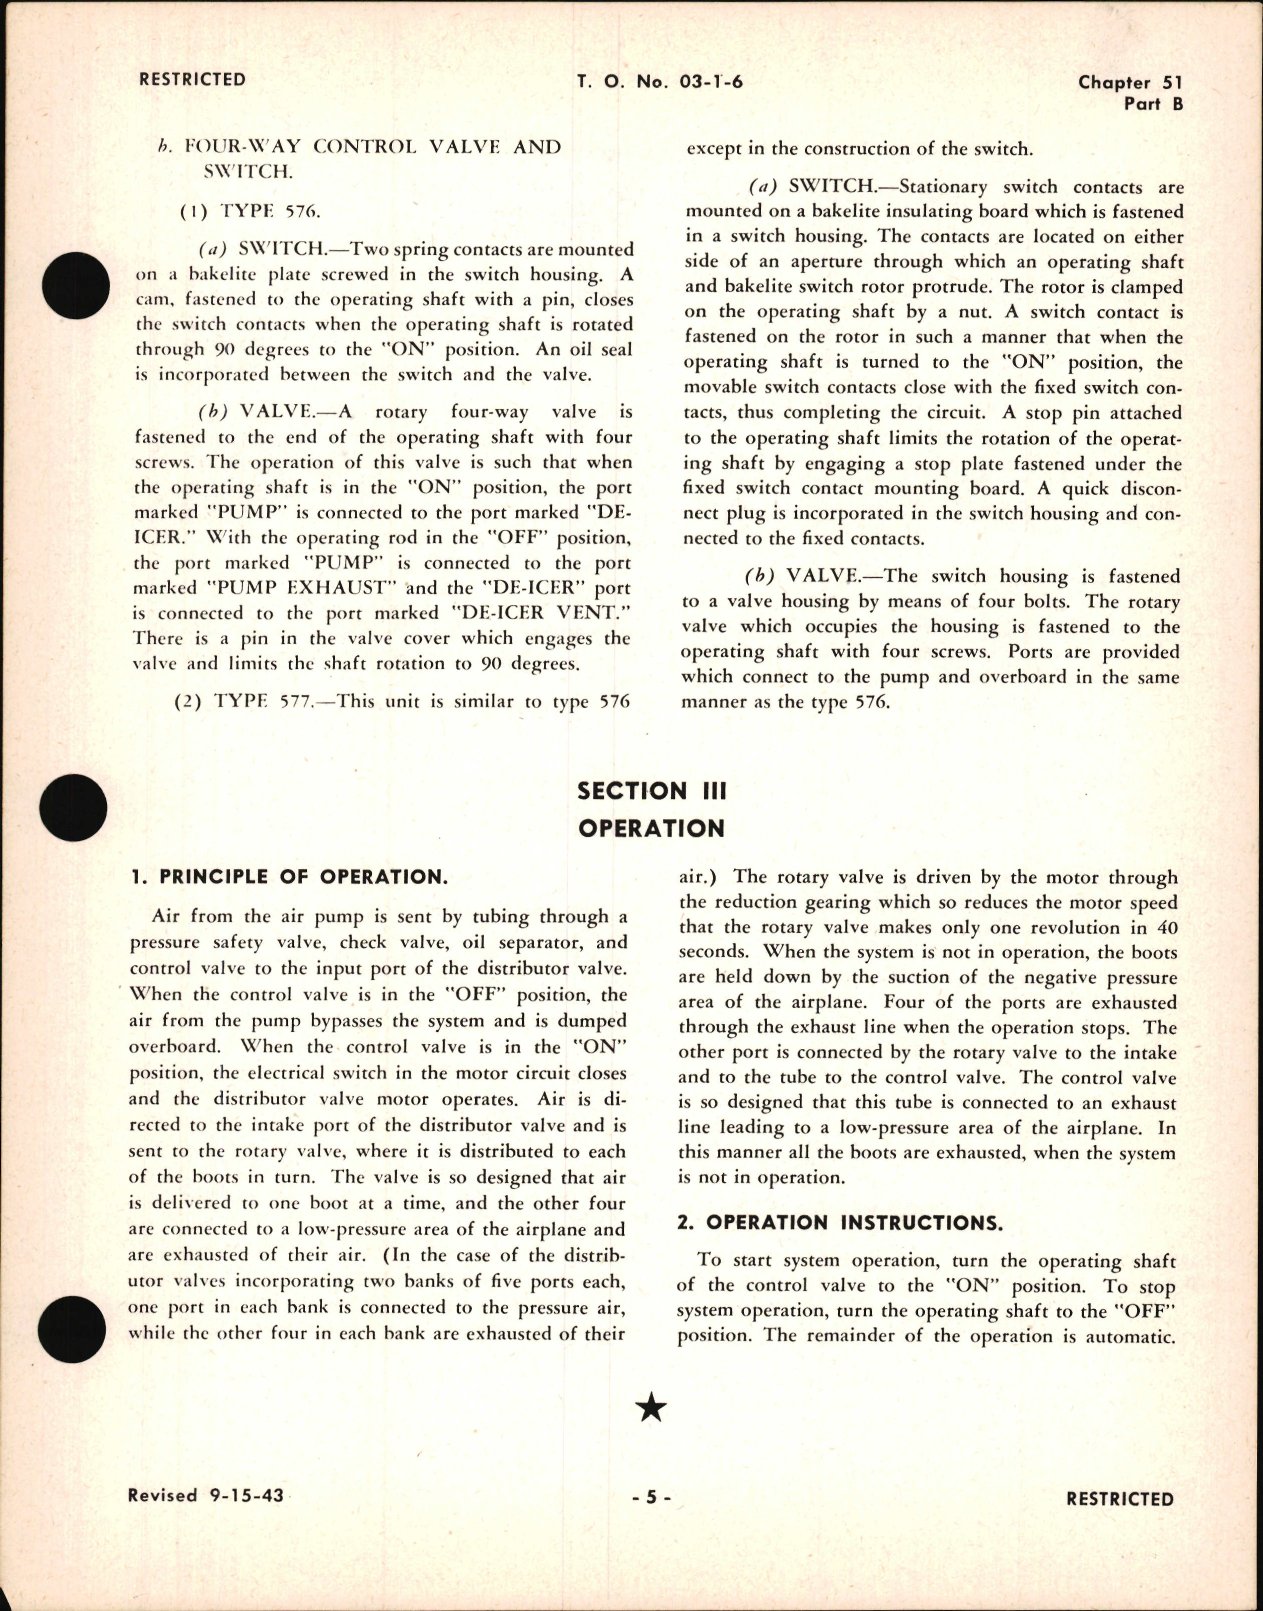 Sample page 5 from AirCorps Library document: Overhaul Instructions for De-Icer Distributing Valves and Four-Way Control Valves, Ch 51 Part B